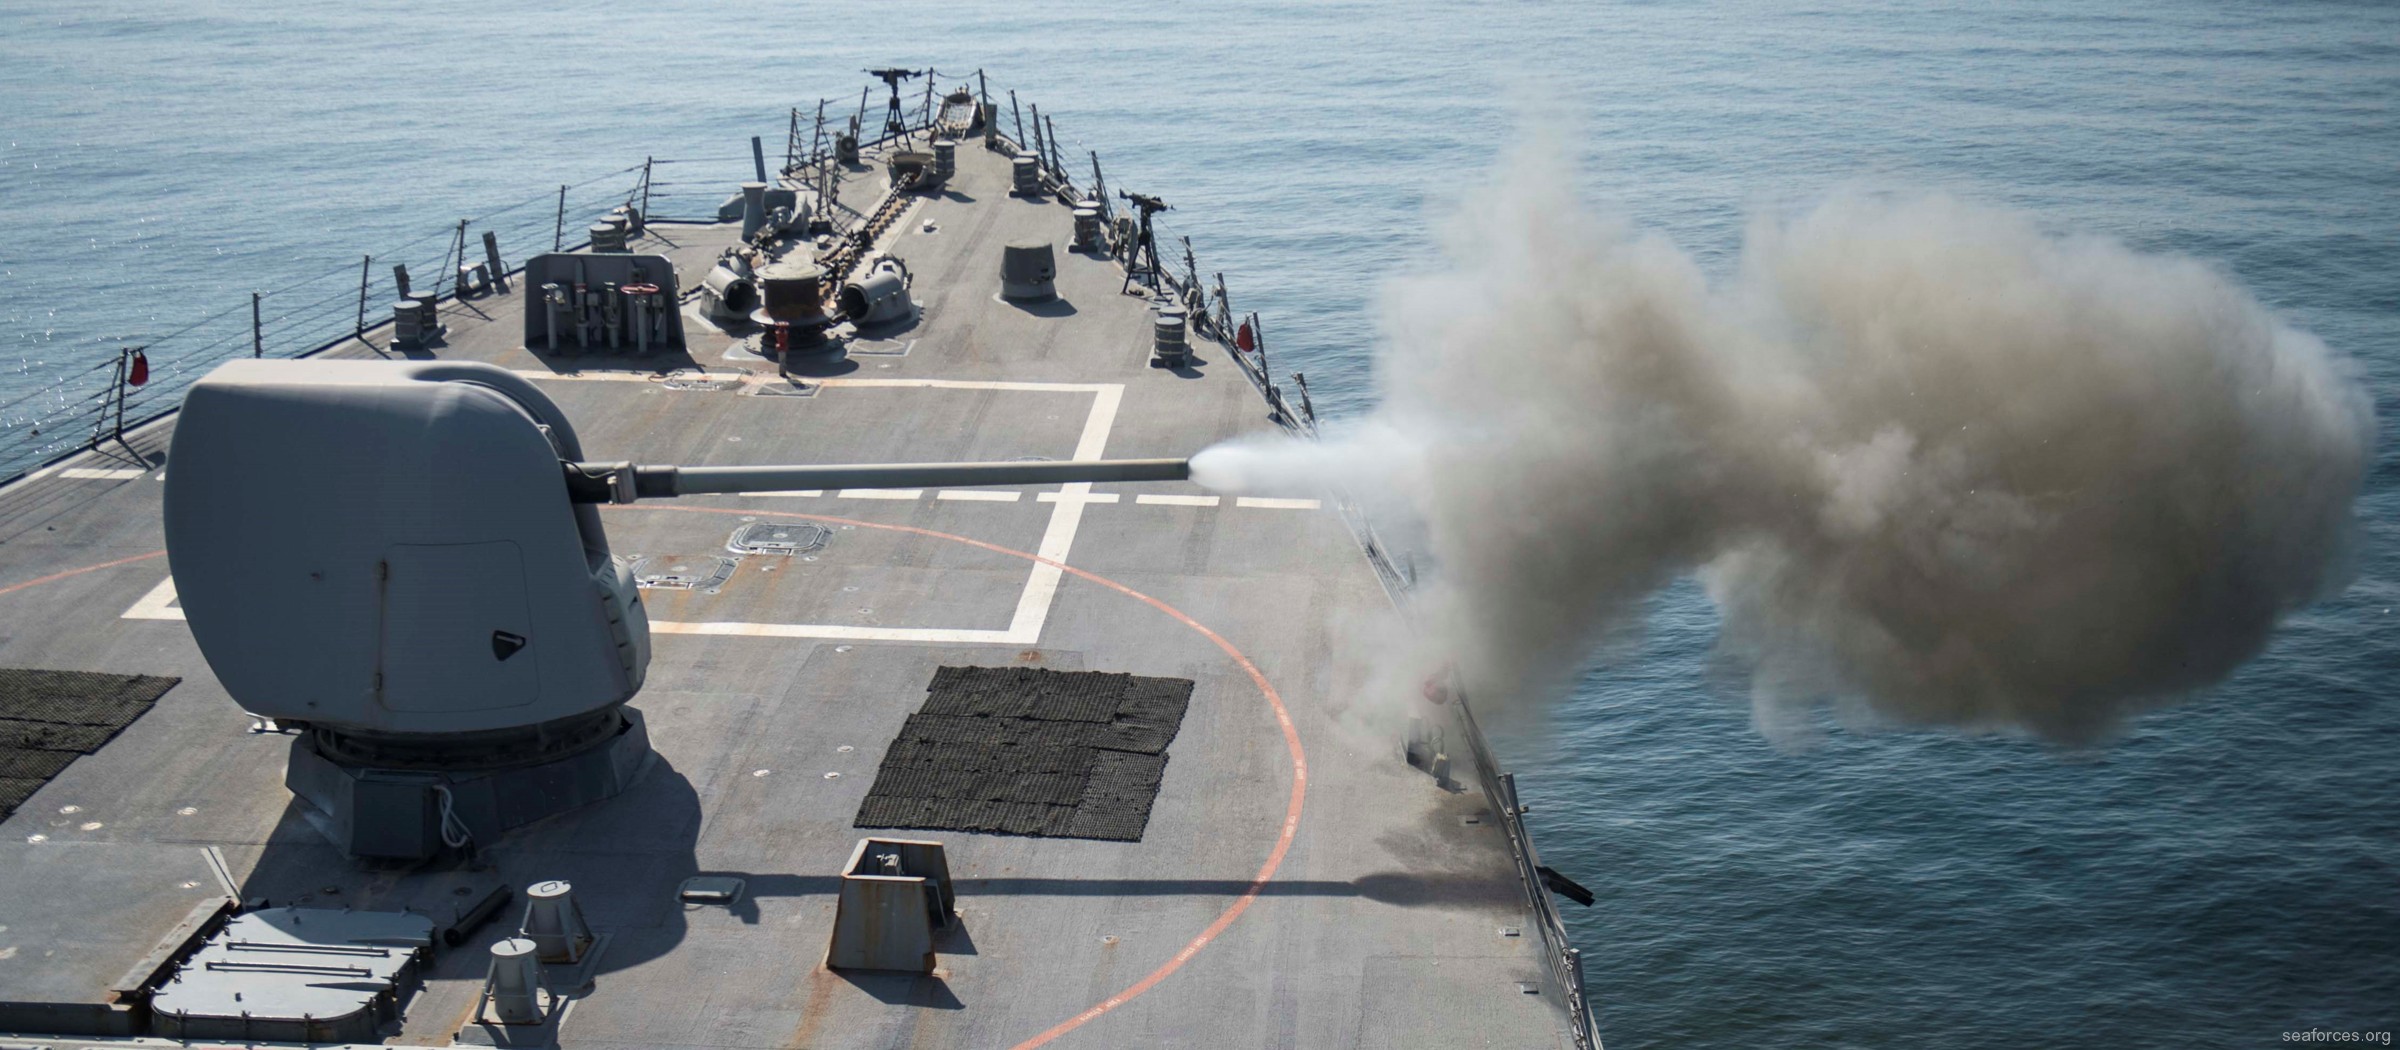 ddg-55 uss stout guided missile destroyer us navy 10 mk-45 mod.2 gun 5-inches 54-caliber 127mm